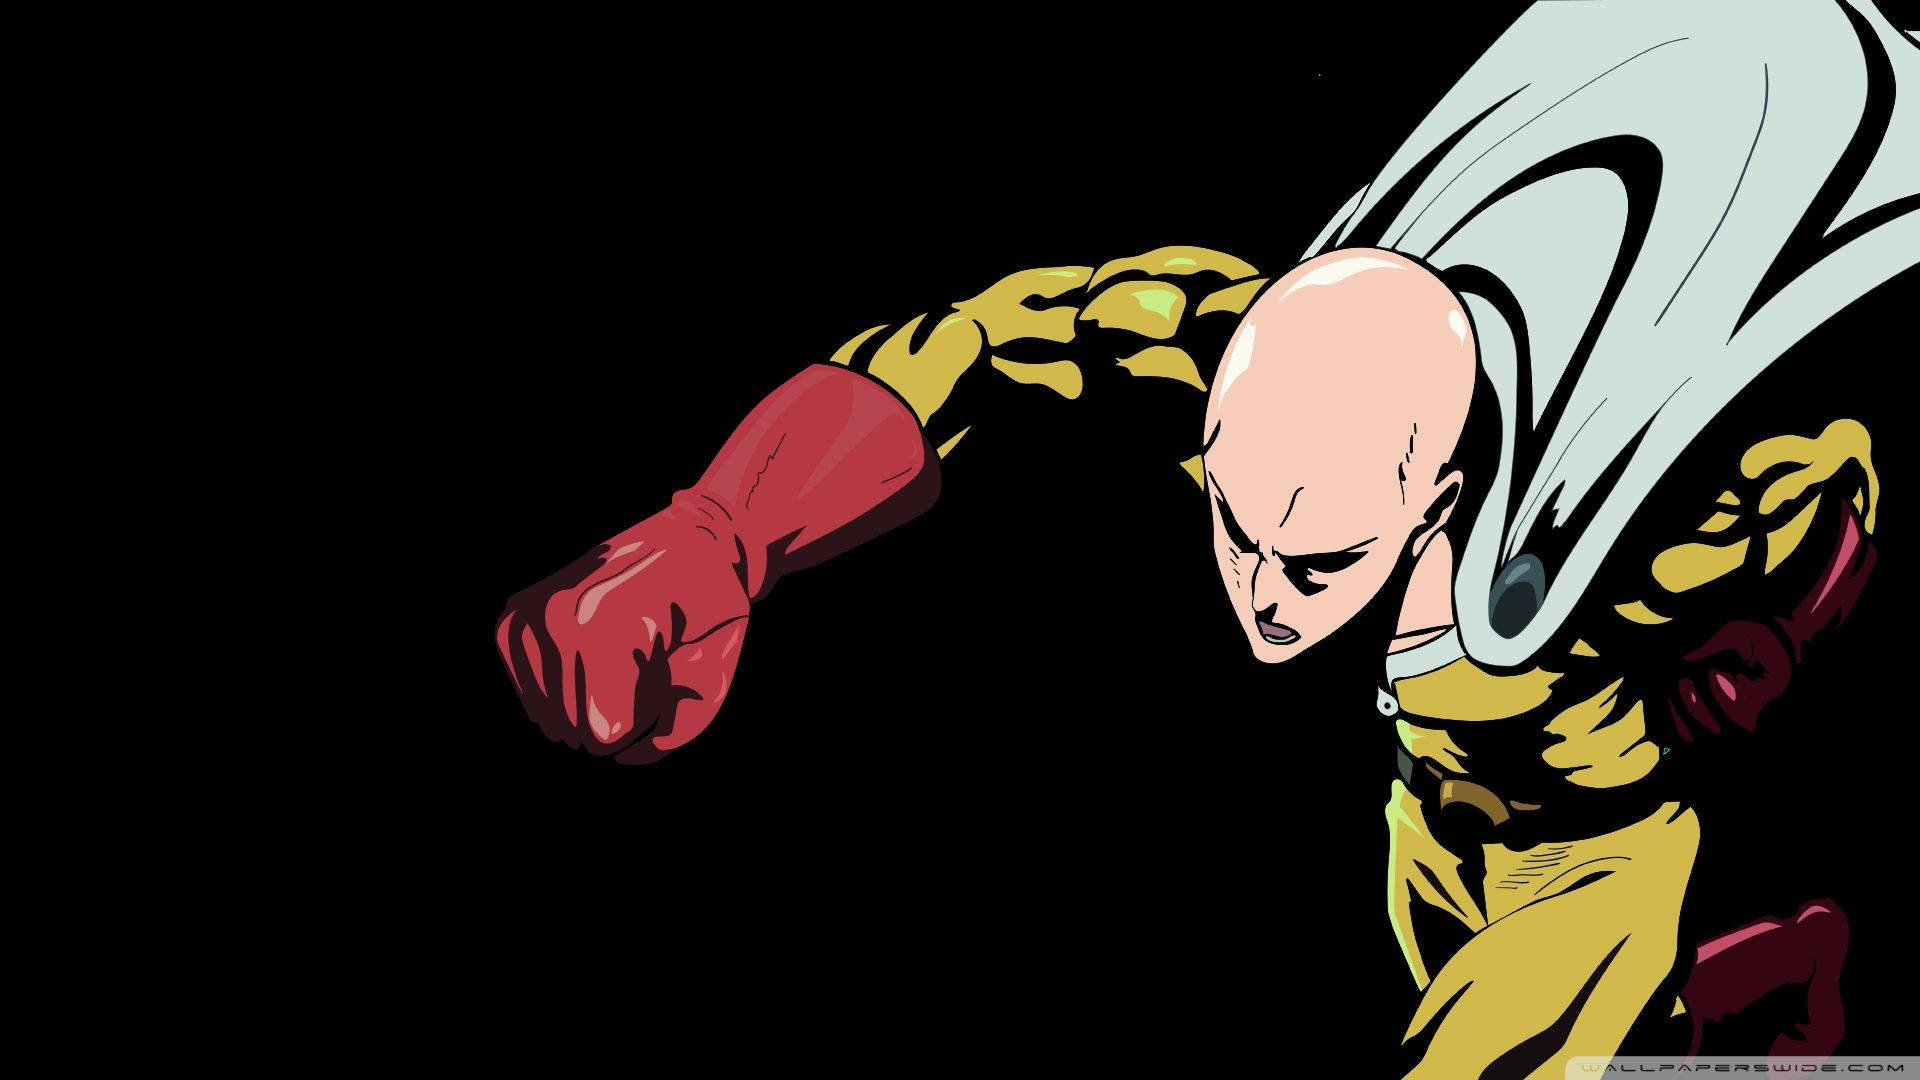 Free One Punch Man Wallpaper Downloads, [100+] One Punch Man Wallpapers for  FREE 